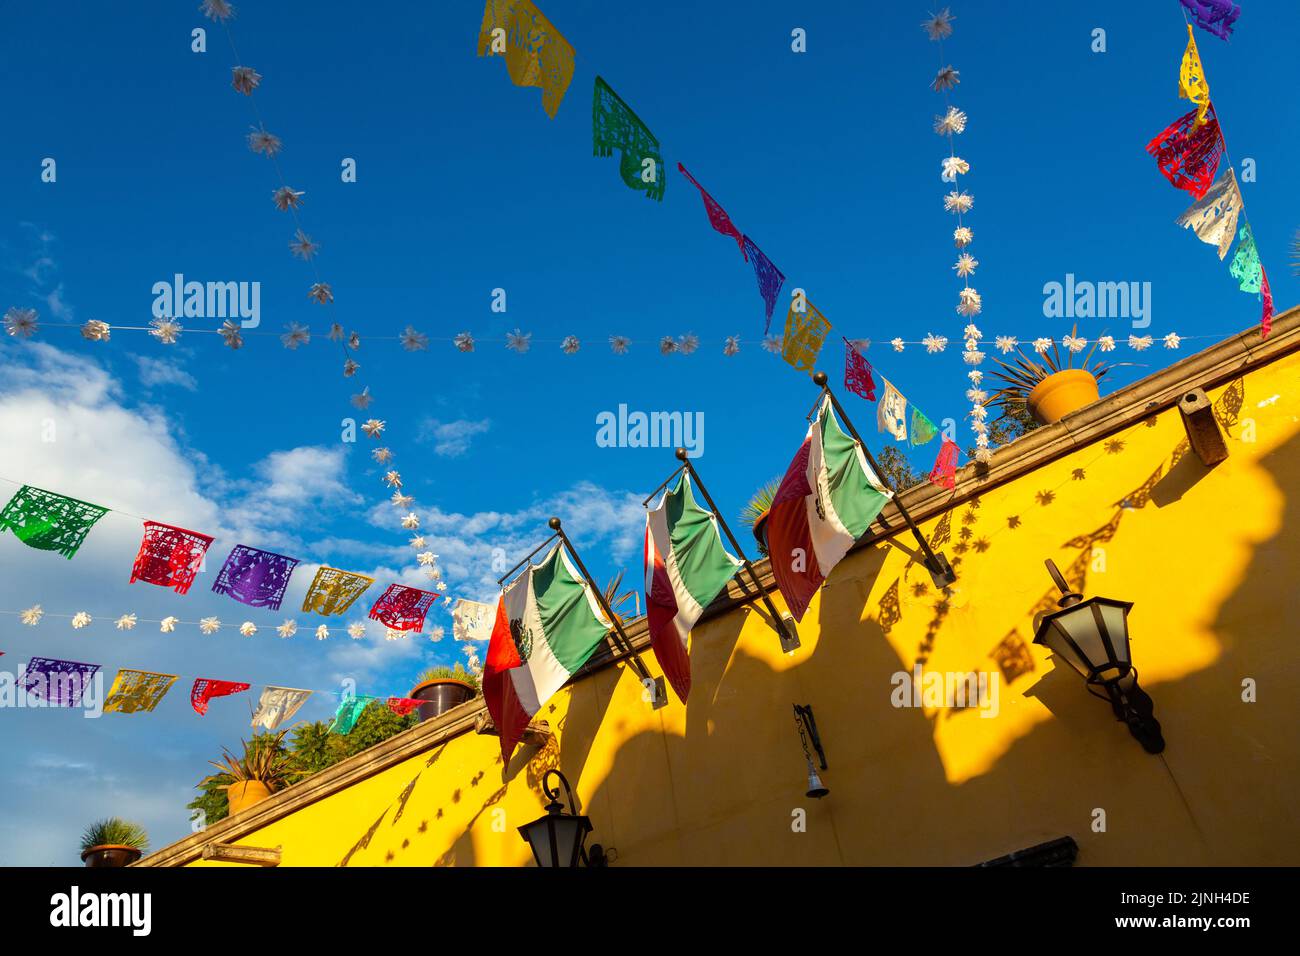 Colorful papel picado fiesta banners and Mexican flags decorate a Spanish colonial style building in the historic city center of San Miguel de Allende, Mexico. Stock Photo